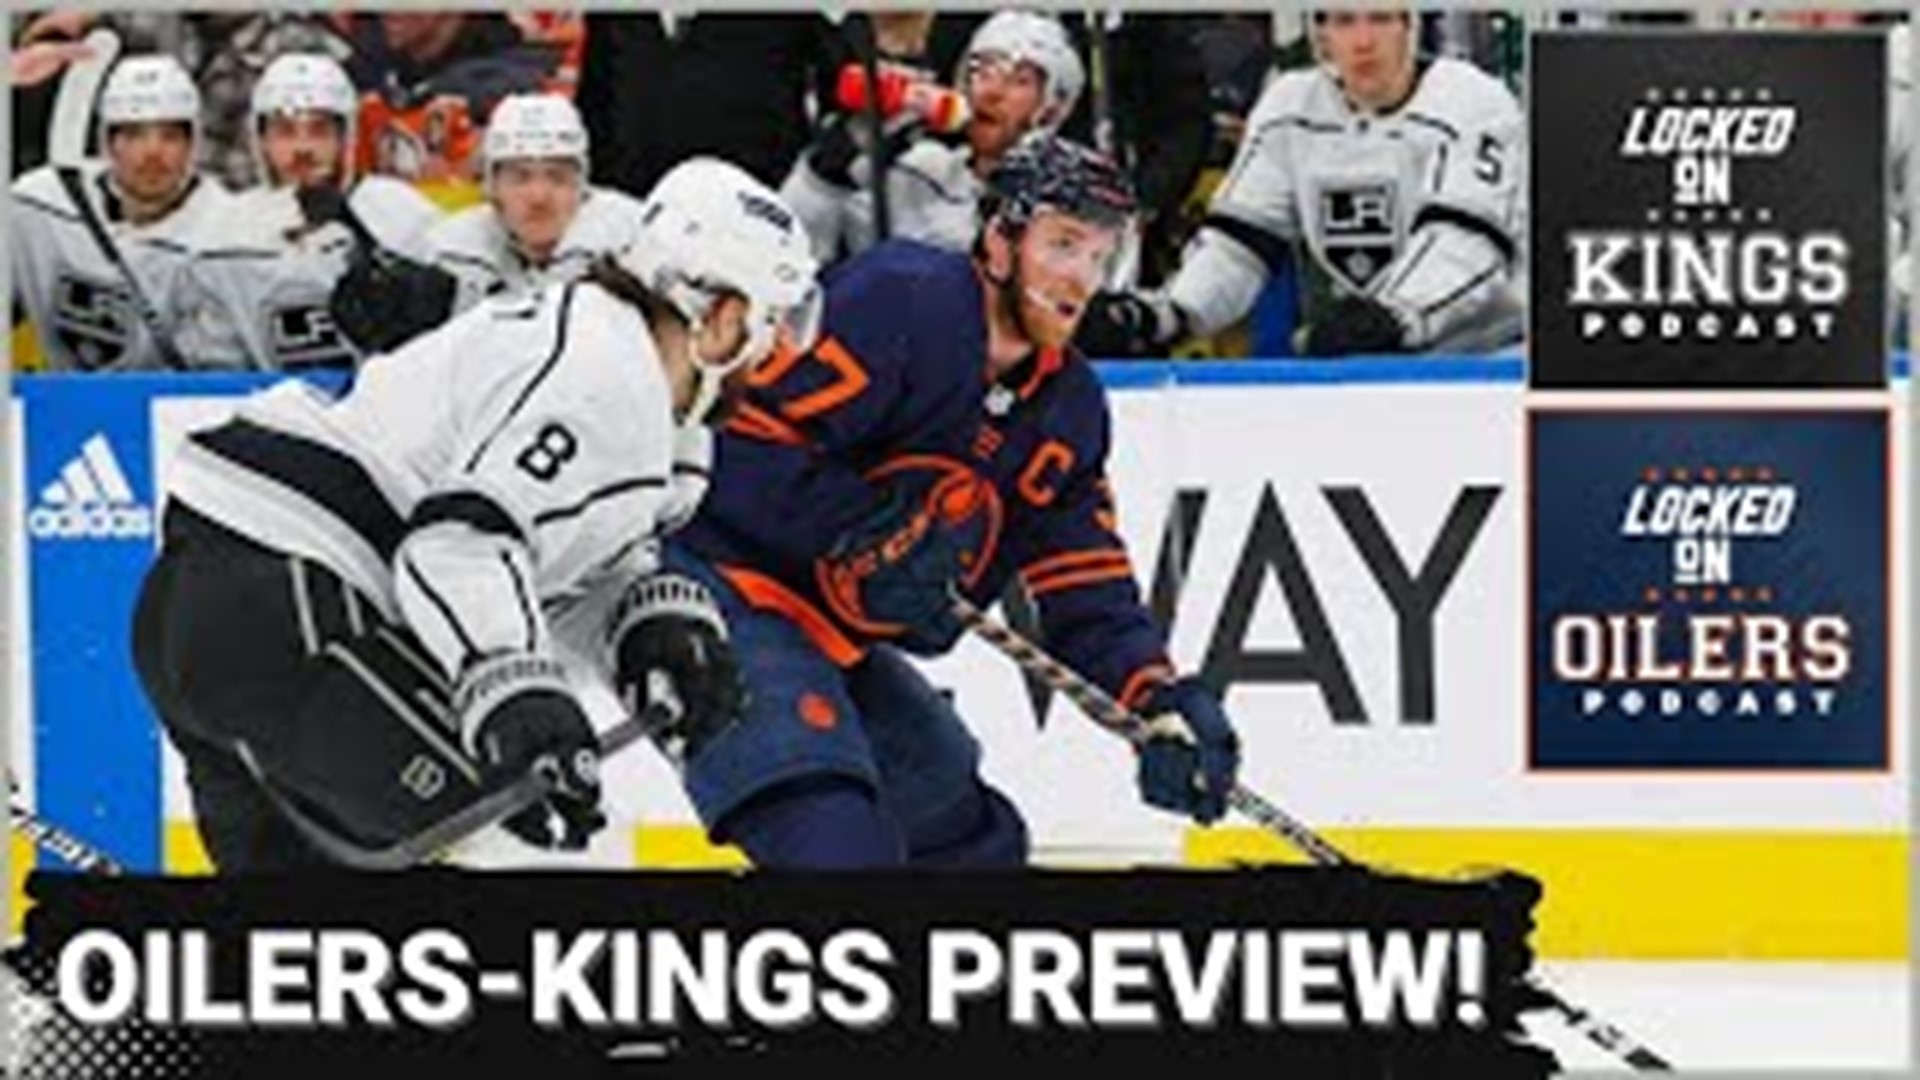 The Stanley Cup playoff are here and the LA Kings and Edmonton Oilers square off for a third consecutive year in the first round of the playoffs.